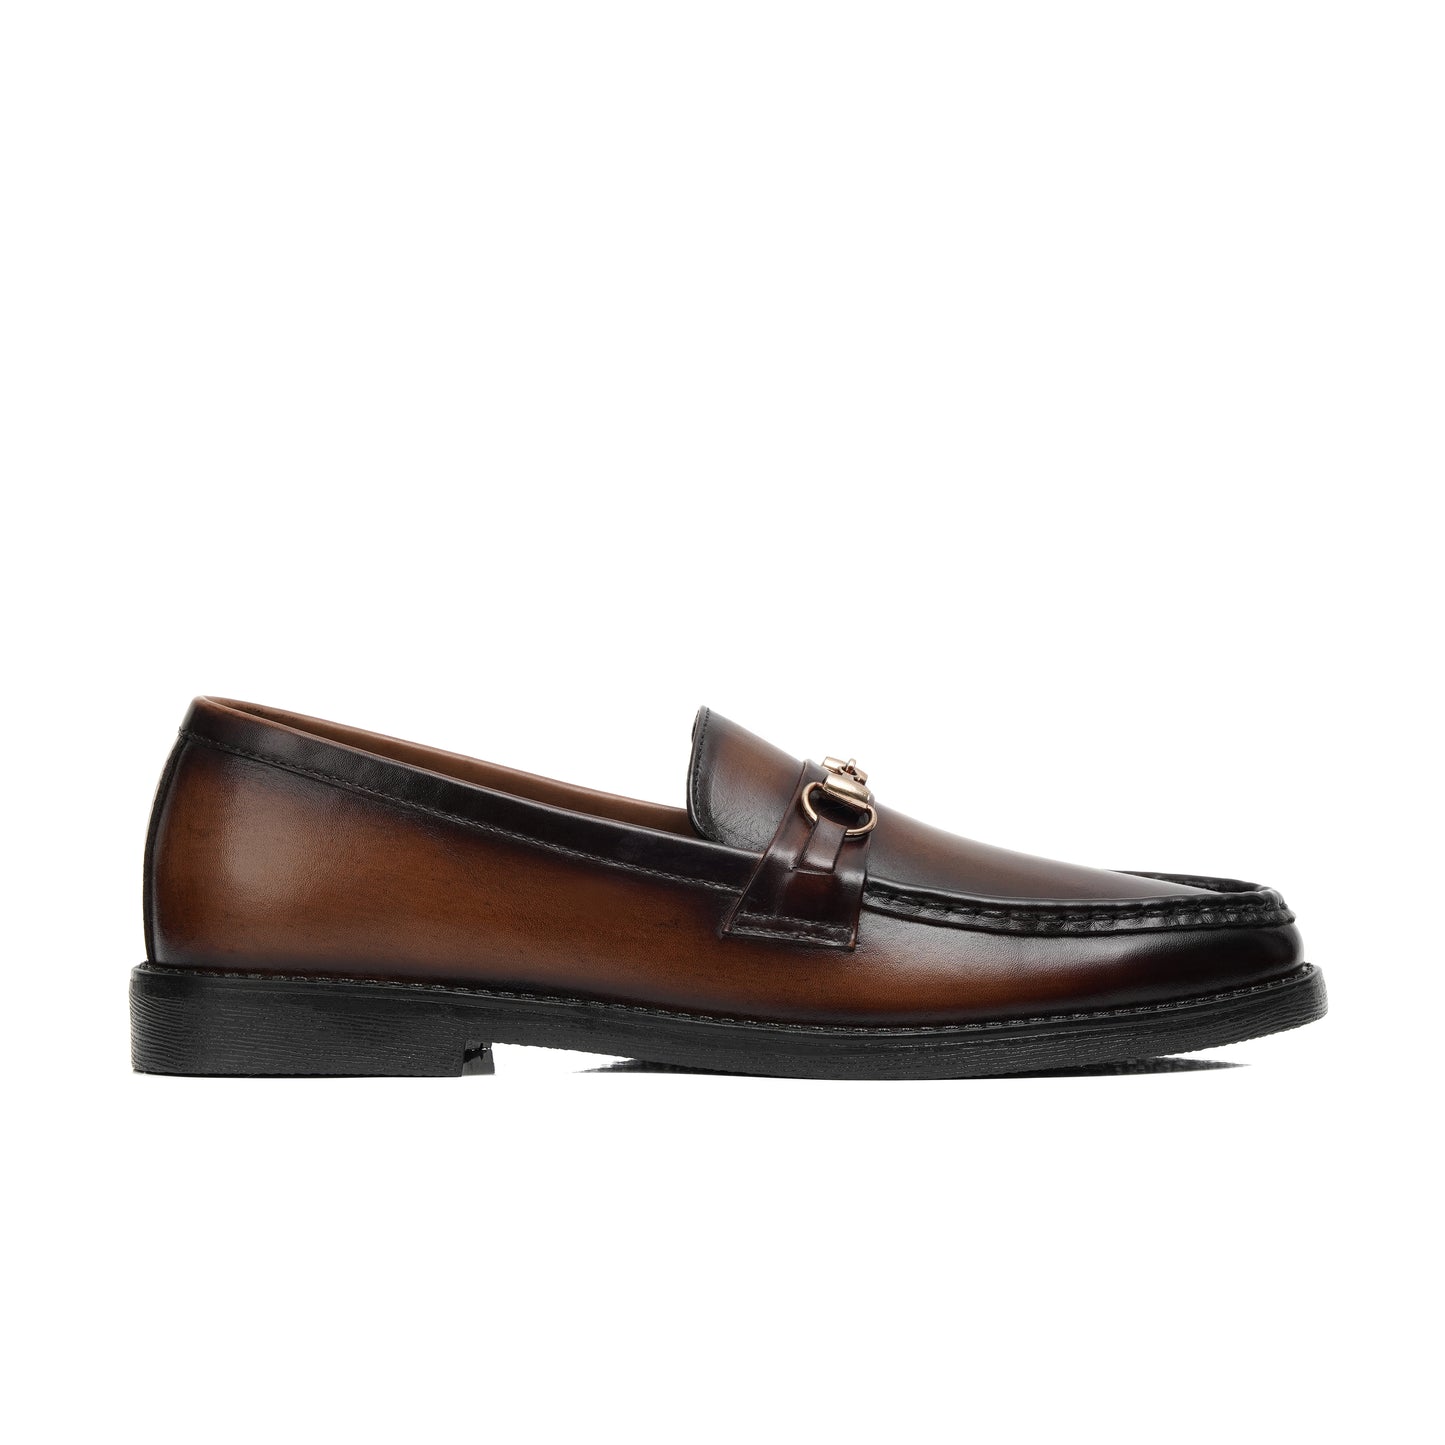 ST-08-Shaded loafers with Patina finish